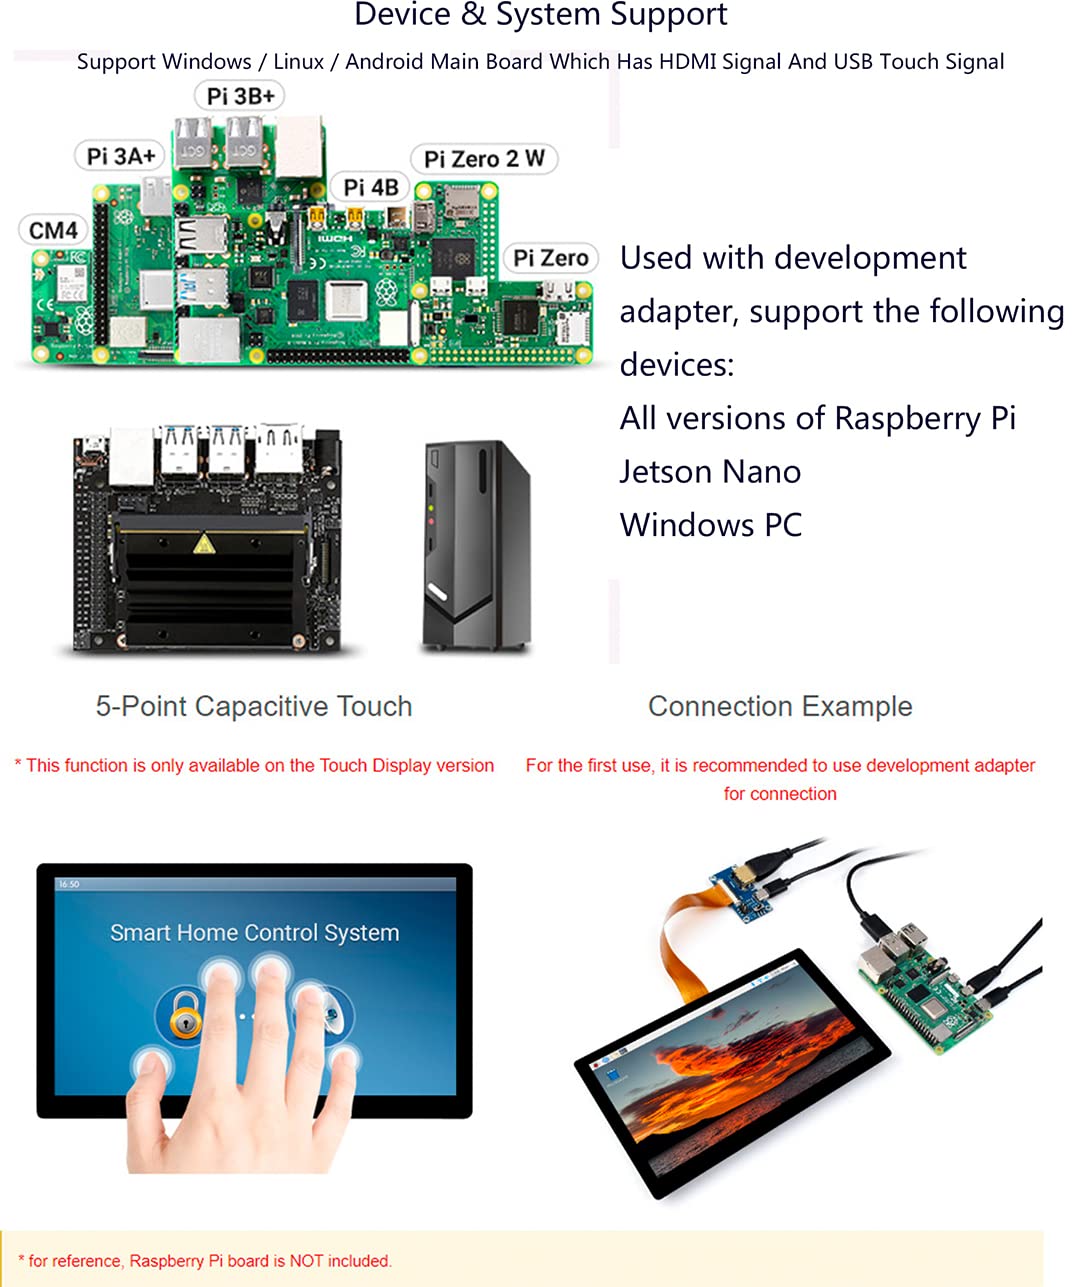 waveshare 7inch QLED Touch Capacitive Display 1024x600 Pixel, Integrated Thin and Light LCD with Adapter Board, for Raspberry Pi/Jetson Nano/Windows/PC, Support Windows/Linux/Android